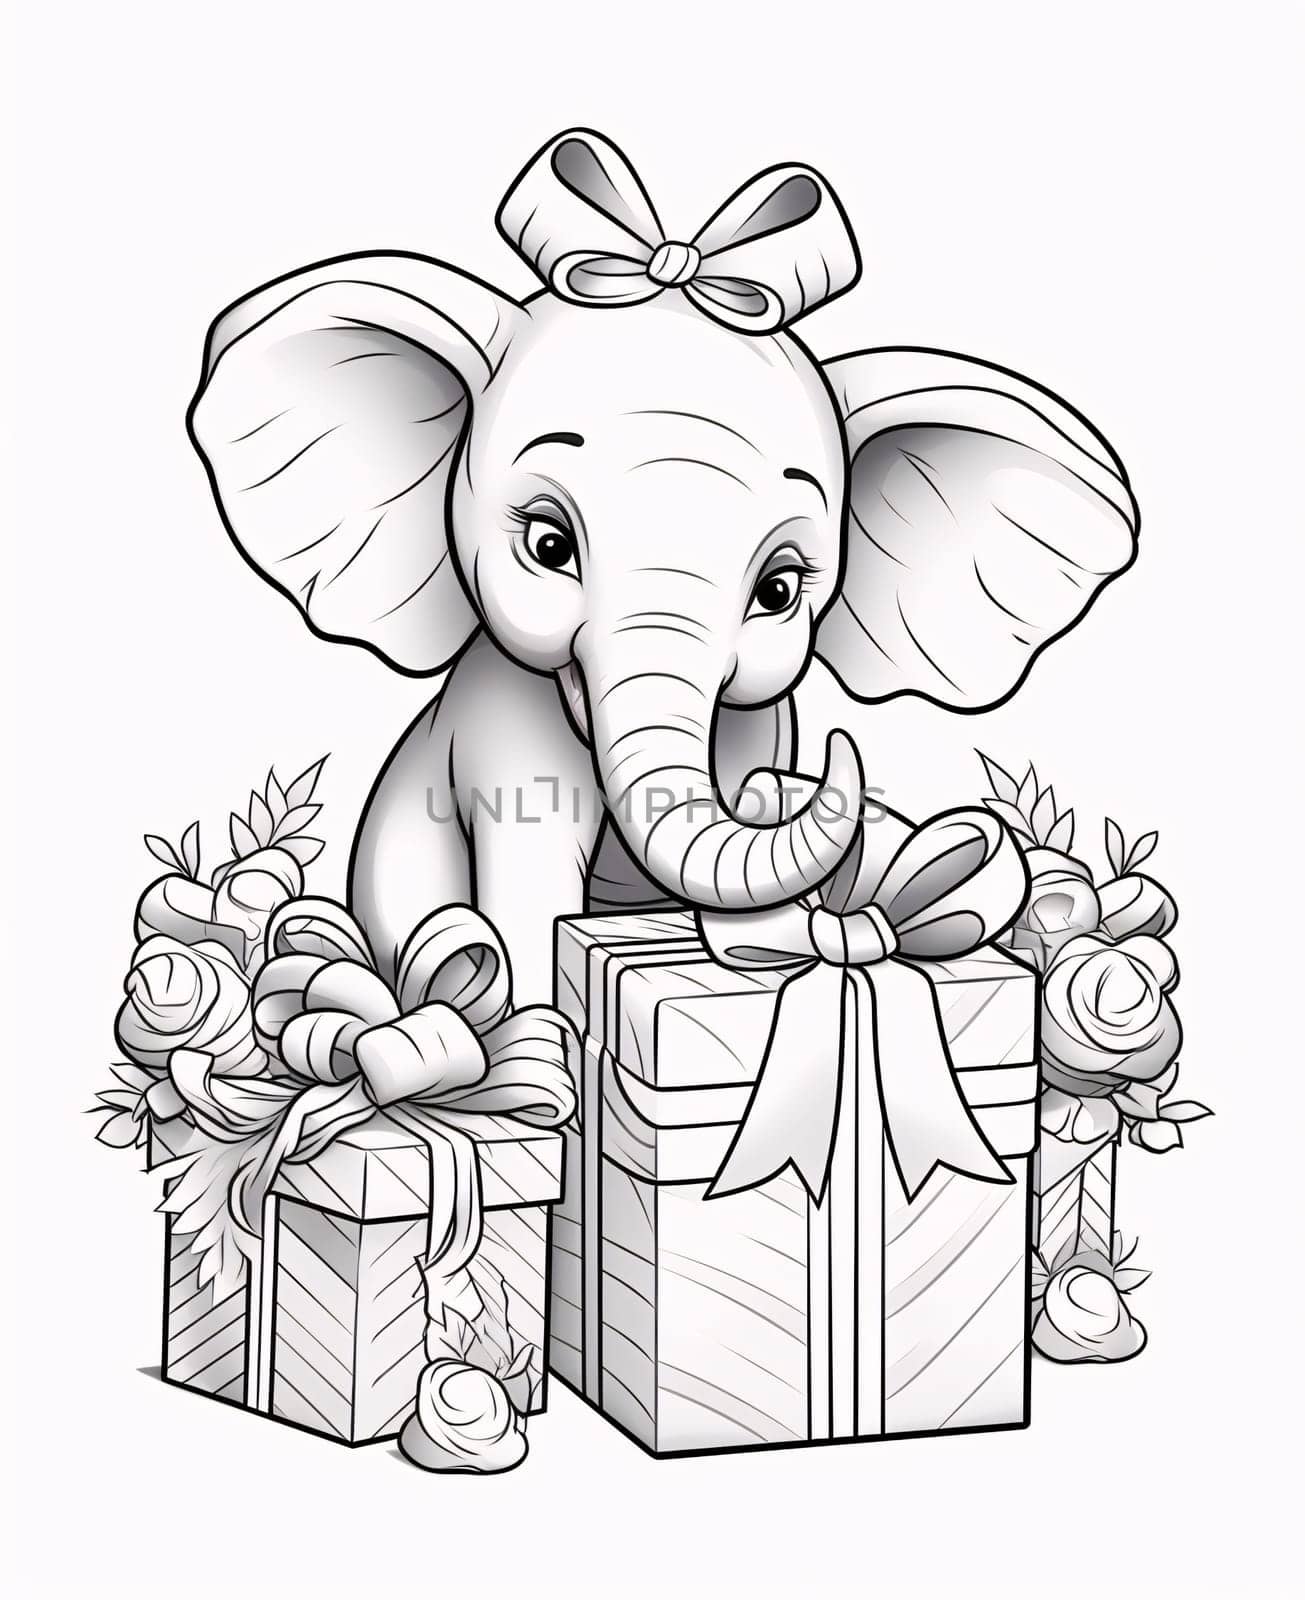 Black and white coloring sheet: Elephant with a gift. Gifts as a day symbol of present and love. A time of falling in love and love.